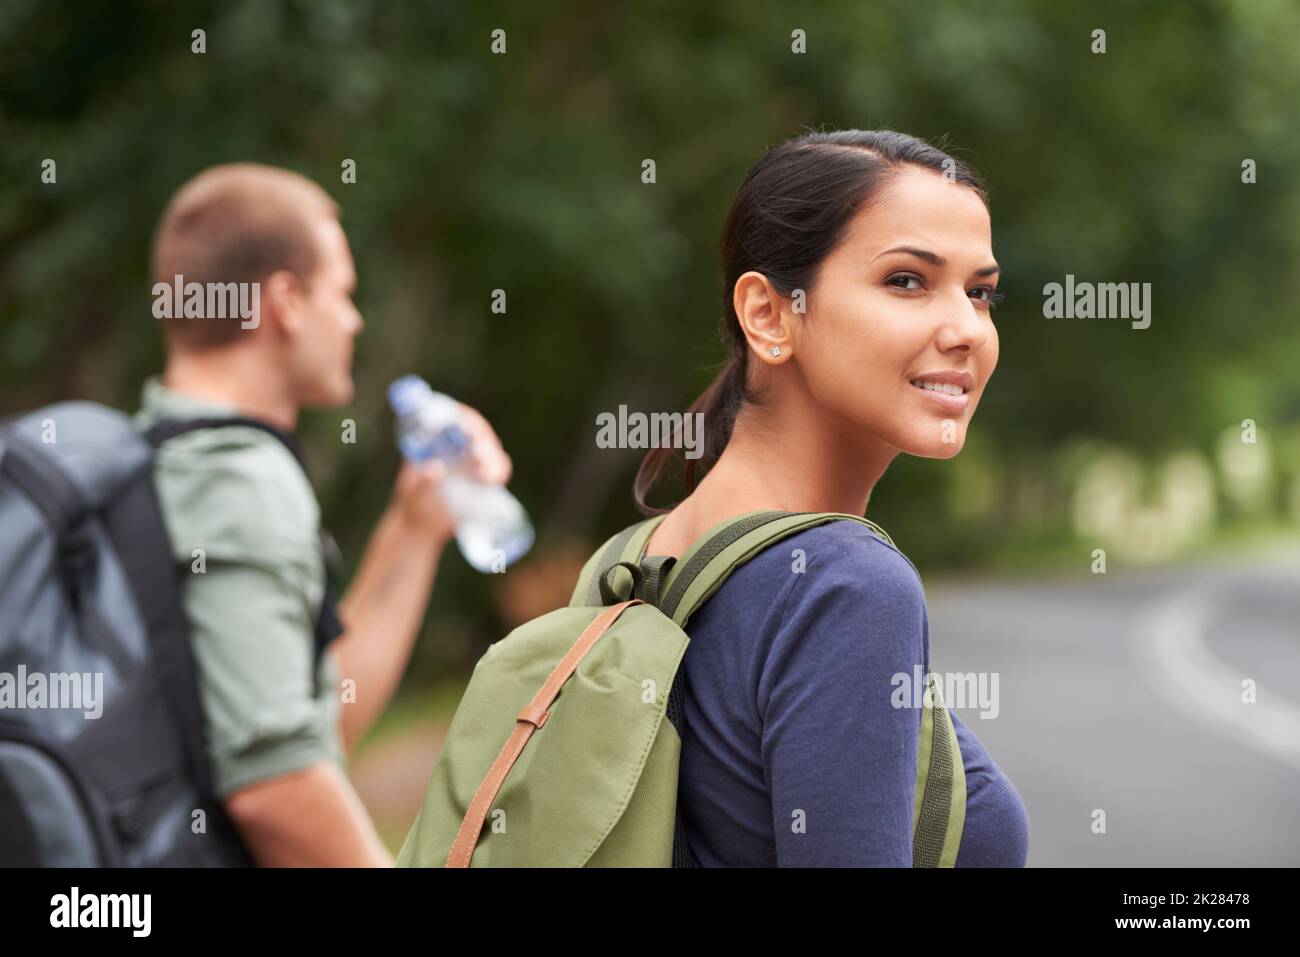 The goal of travel is to explore yourself. A candid image of a woman looking into the distance while her husband drinks water. Stock Photo